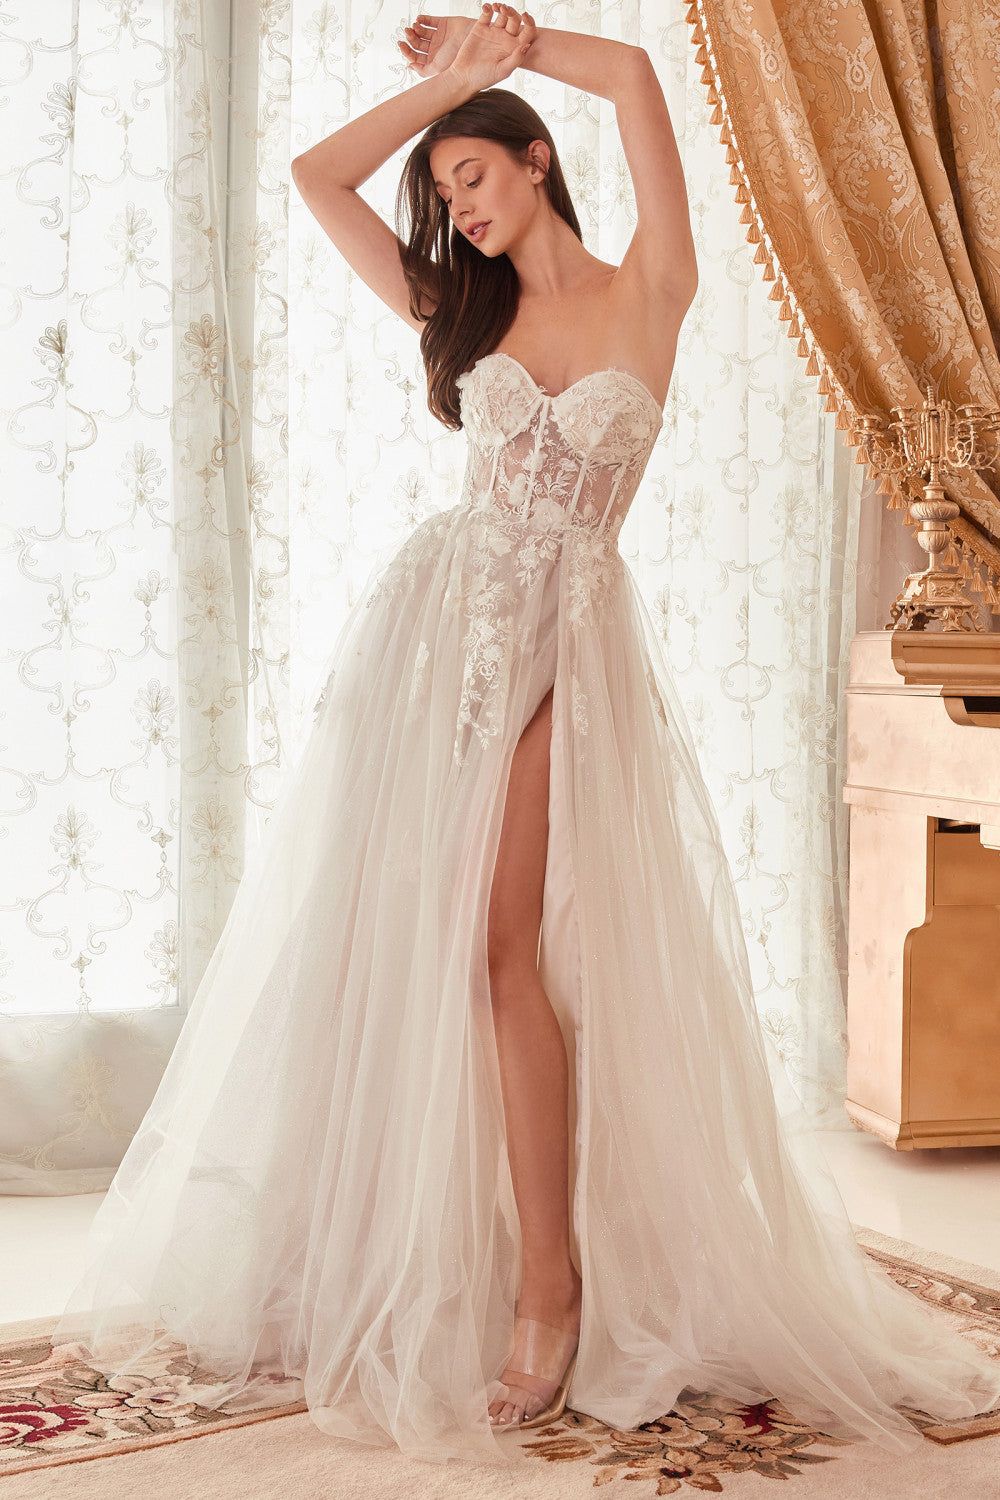 A-line wedding dress with floral applique and ruched bodice